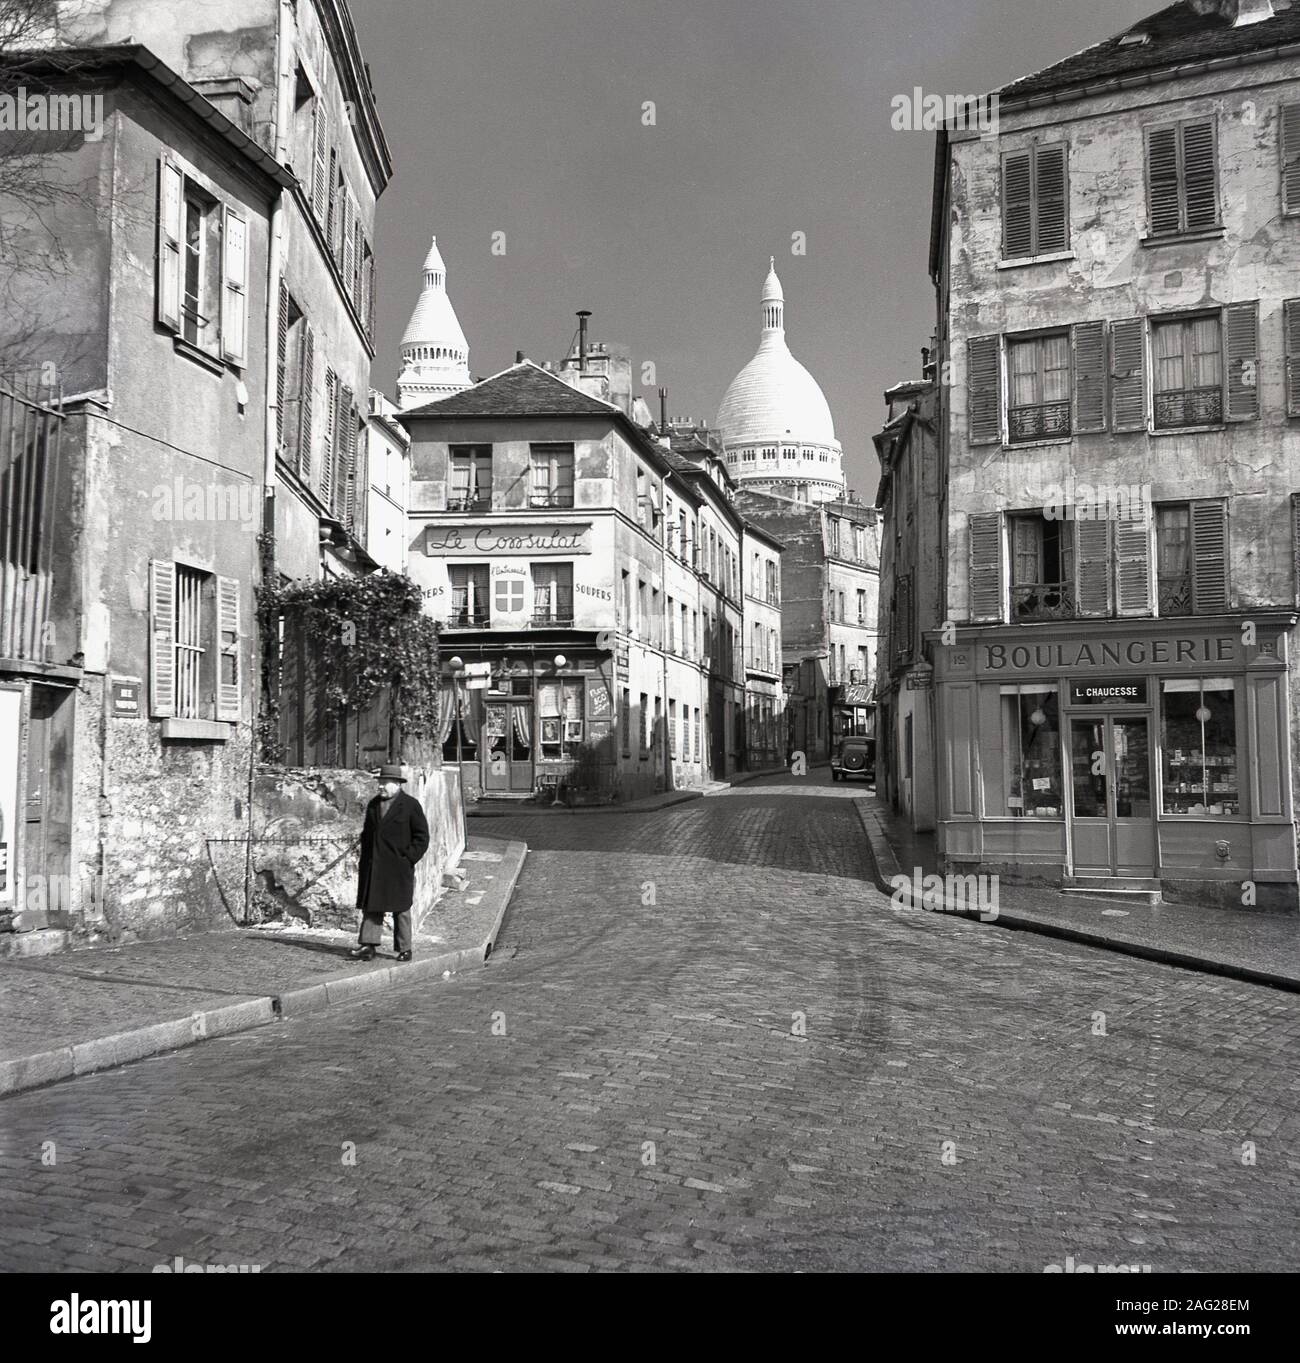 1950s, historical, a view of Le Consulat restuarant, 18 Rue Norvins, Paris, France, an historic cafe on a cobbled lane in the centre of Montmartre, the artistic district of the city. The famous domes of the Notre Dame cathedral can be seen in the distance. Stock Photo